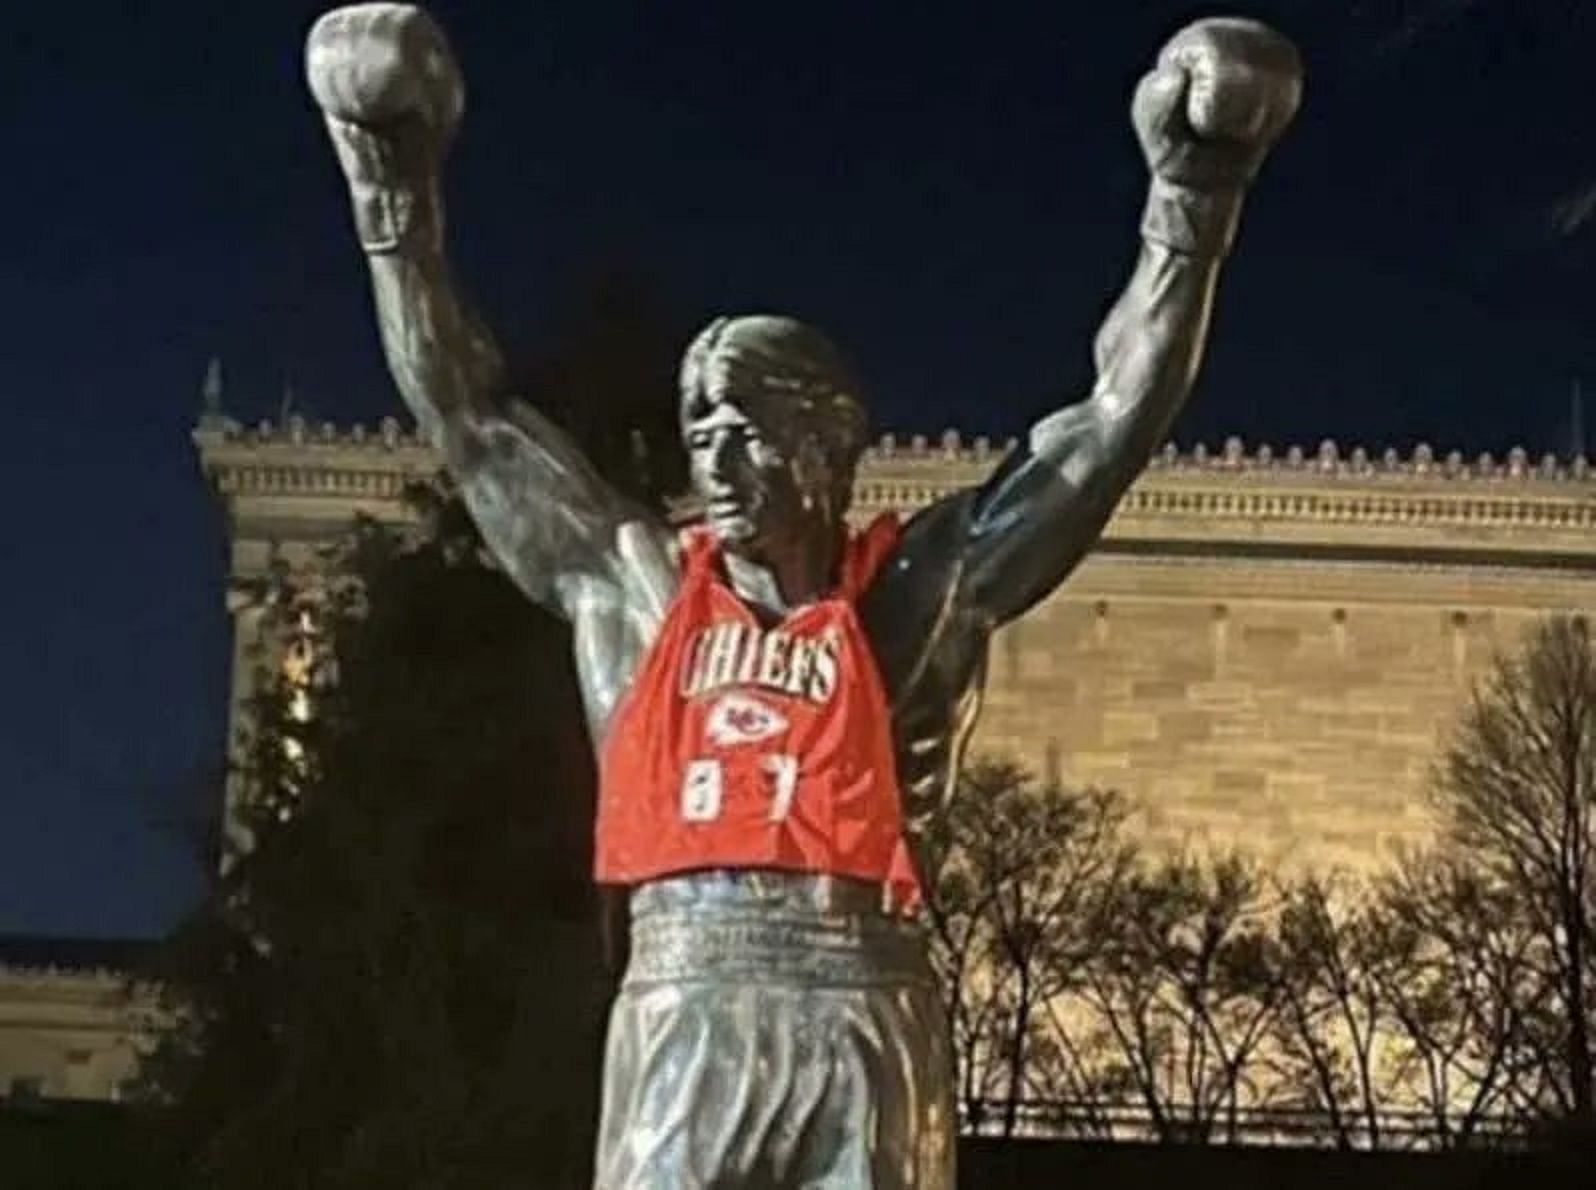 Rocky Statue draped in Kansas City Chiefs colors